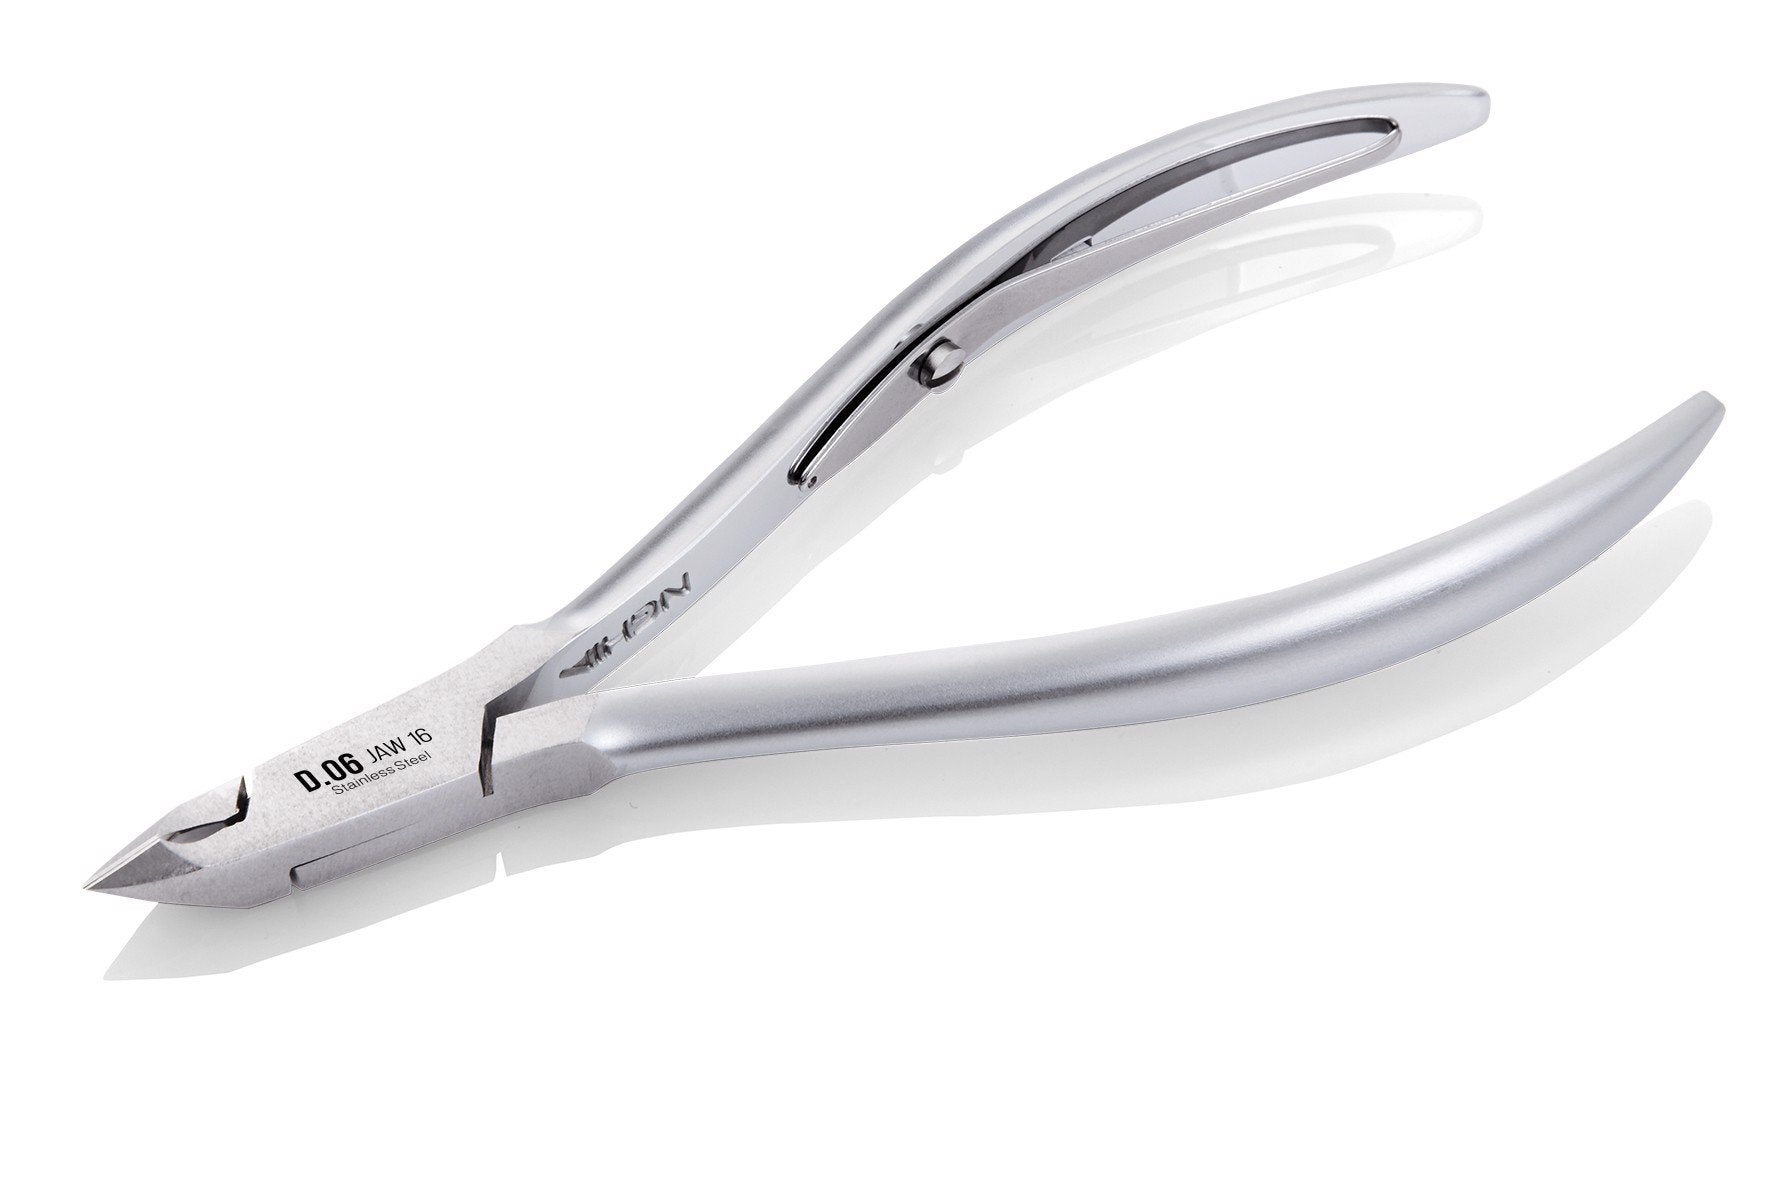 D-06-16 NGHIA STAINLESS STEEL CUTICLE NIPPER